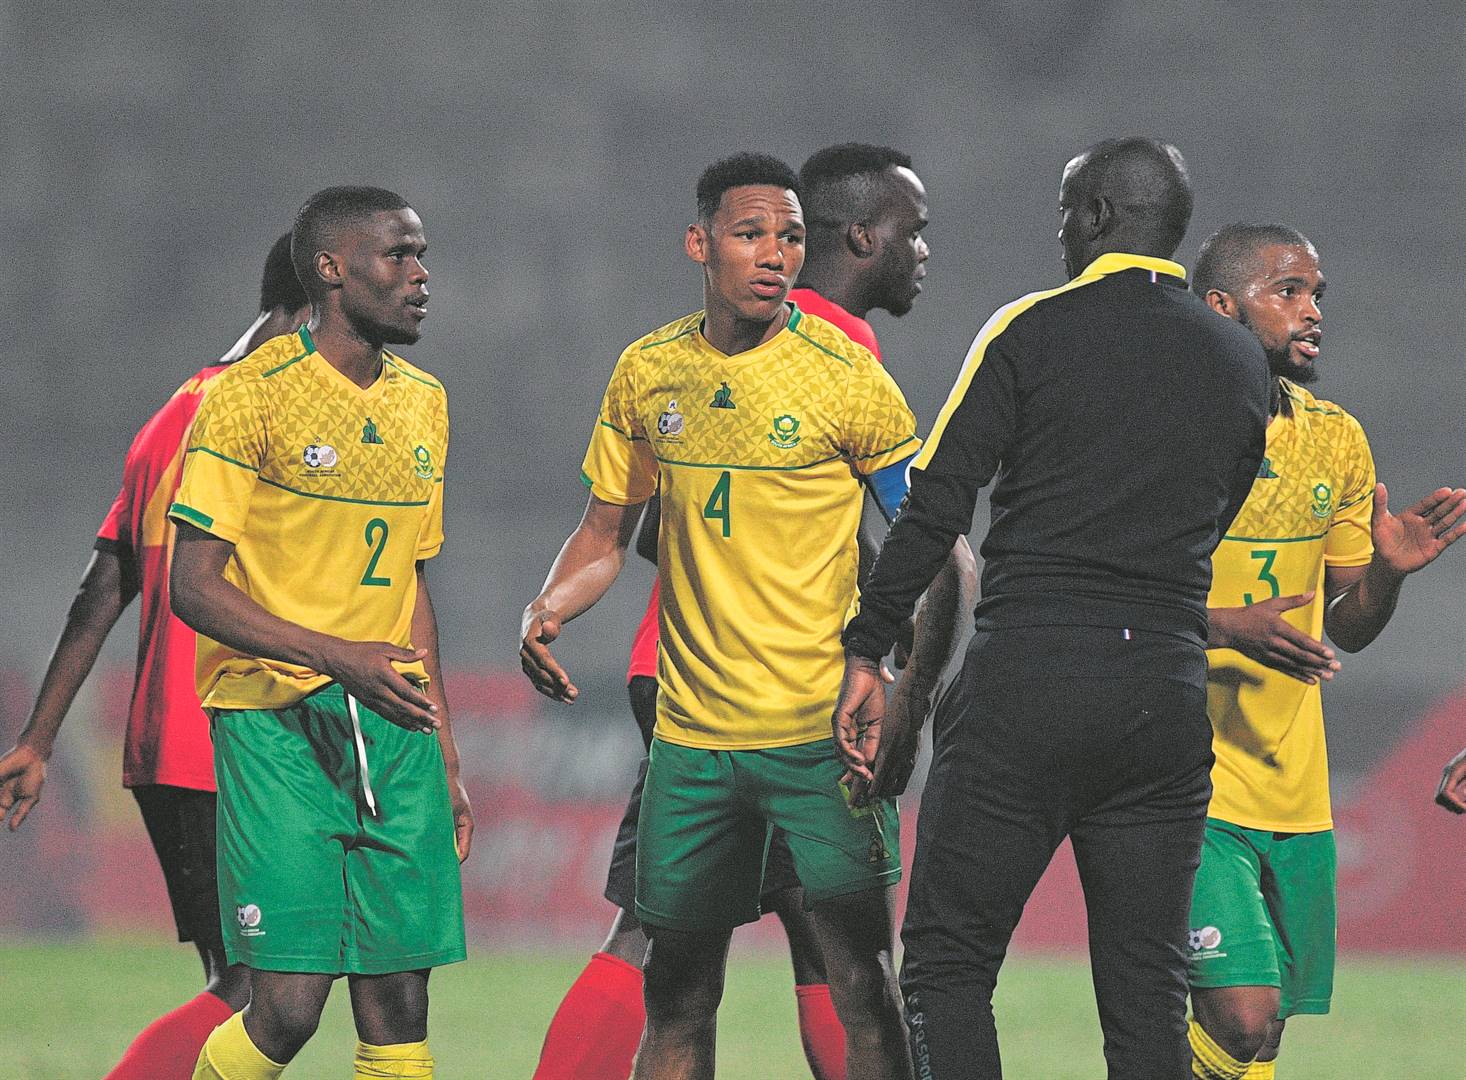 Bafana Bafana Cosafa Cup coach, Helman Mkhalele, and his boys lost the Cosafa Cup in the quarter-final to Mozambique at King Zwelithini Stadium on Wednesday. Photo: Sydney Mahlangu/BackpagePix